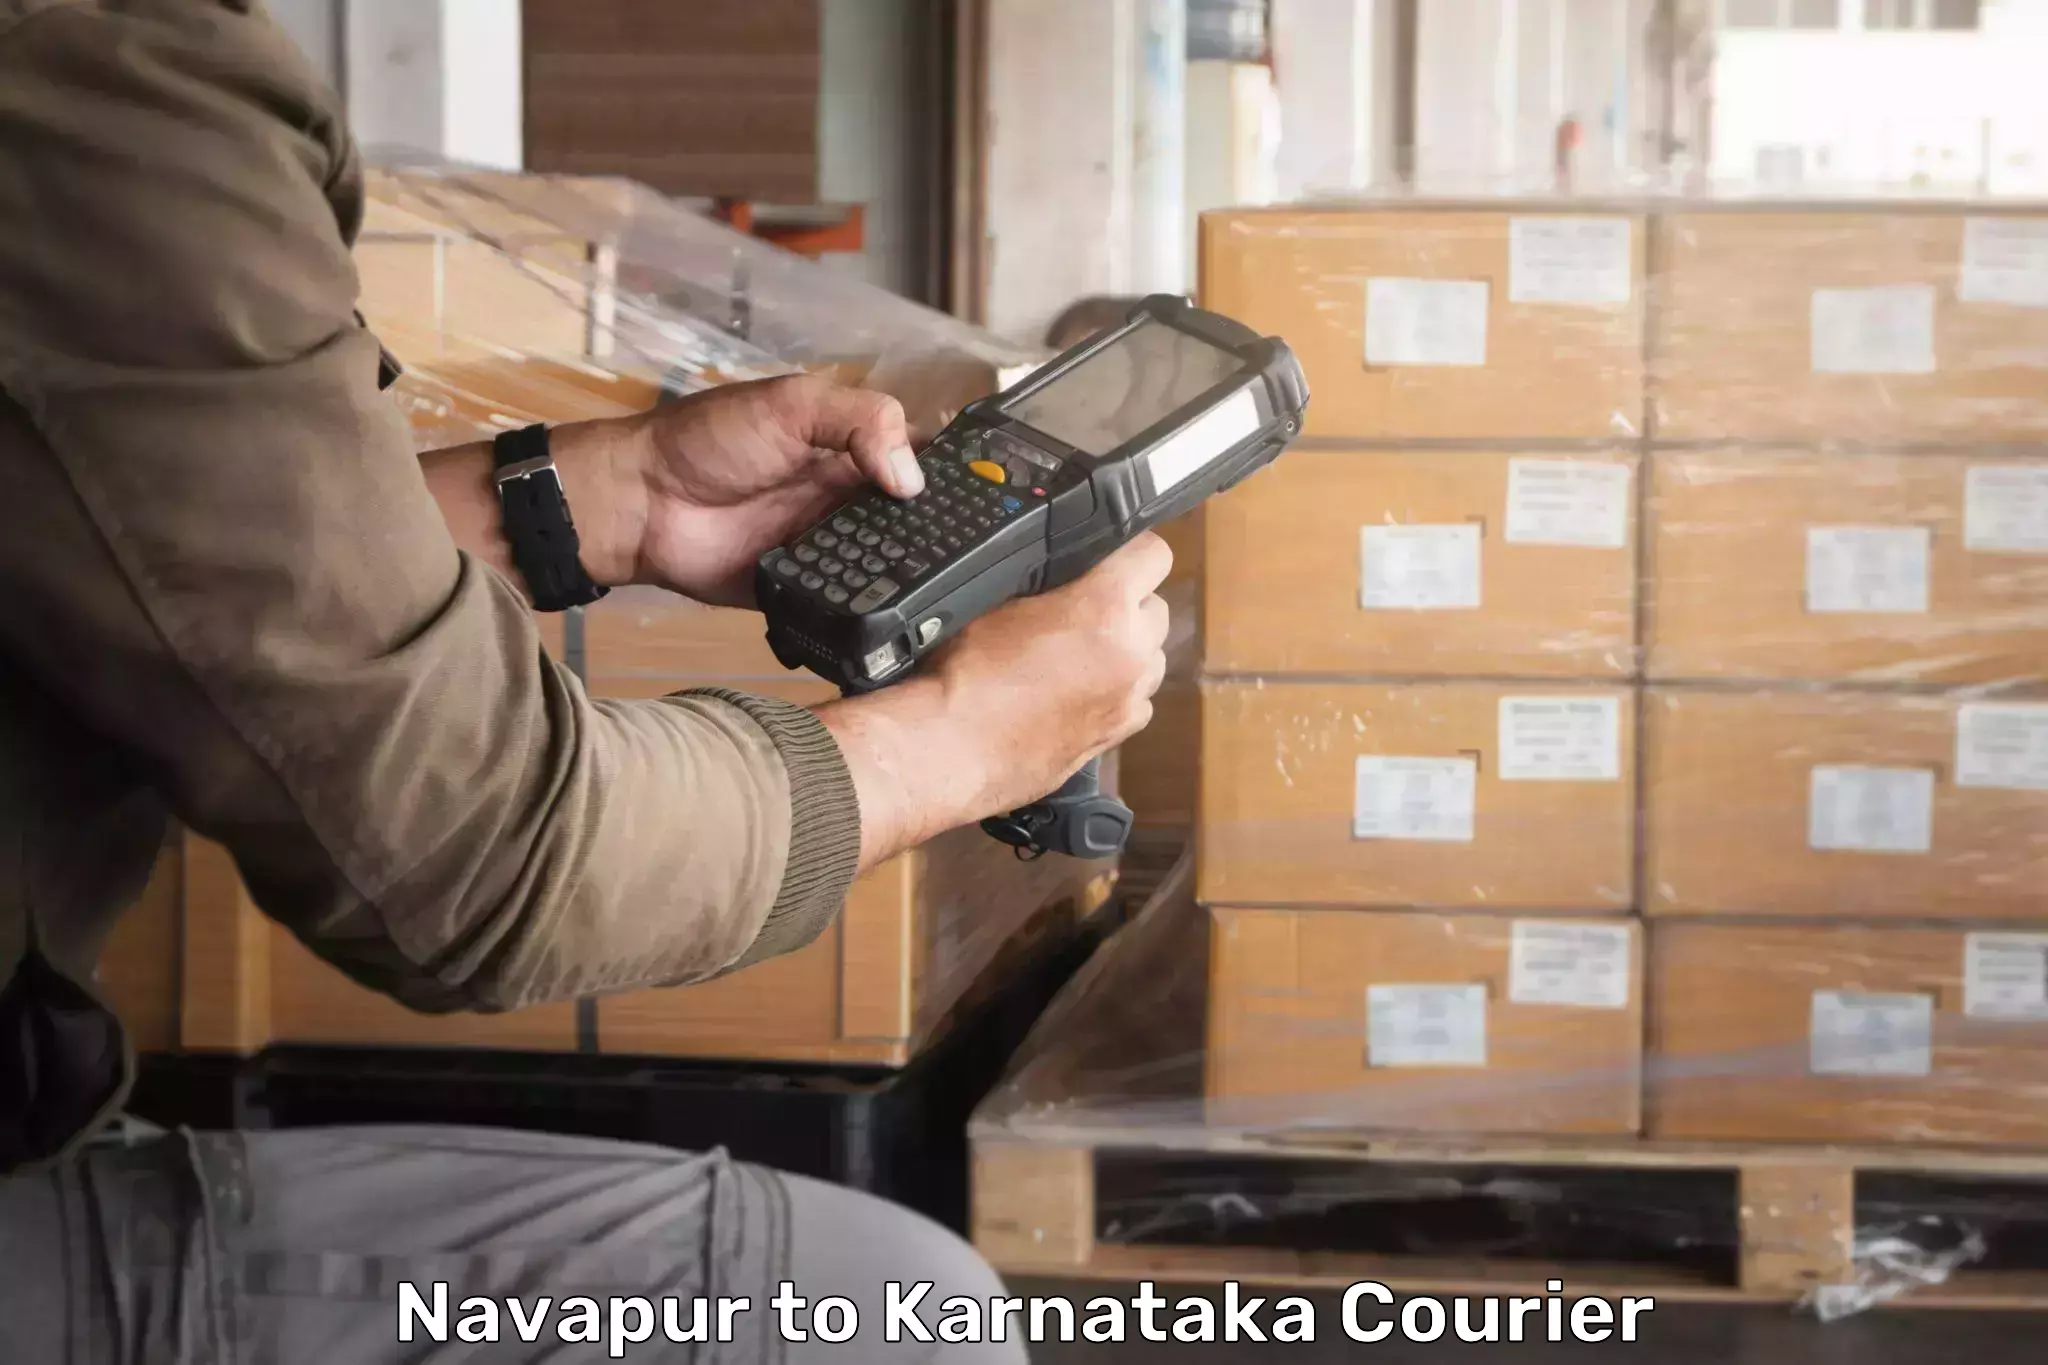 Quality courier services Navapur to Bengaluru